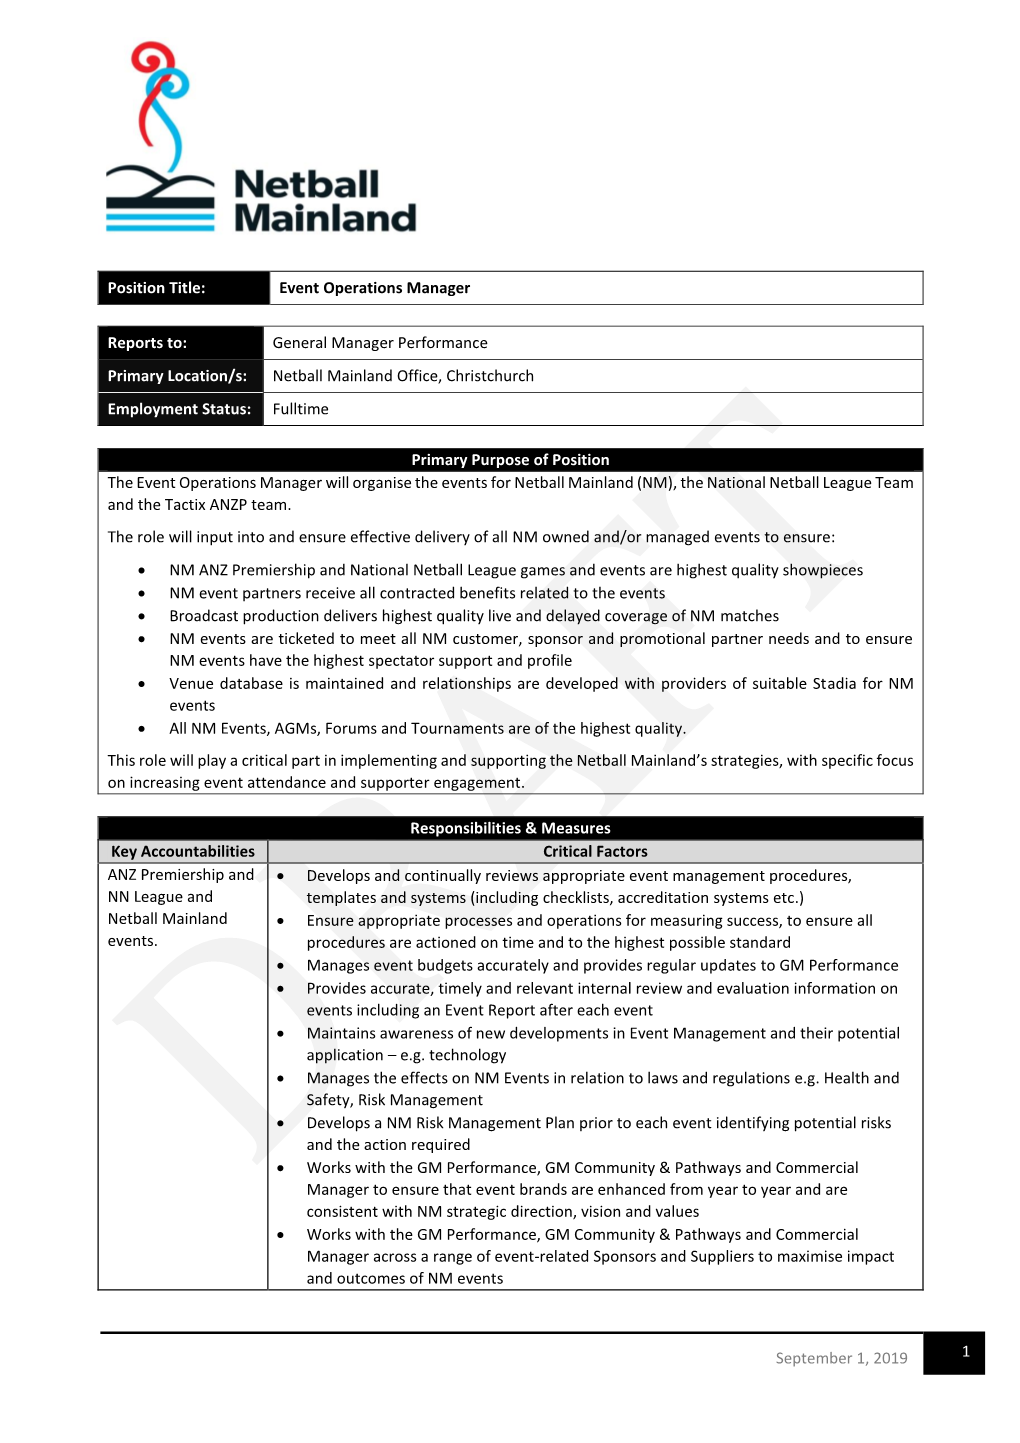 Position Description Is to Provide a Summary of the Major Duties and Responsibilities Performed by Staff in This Role